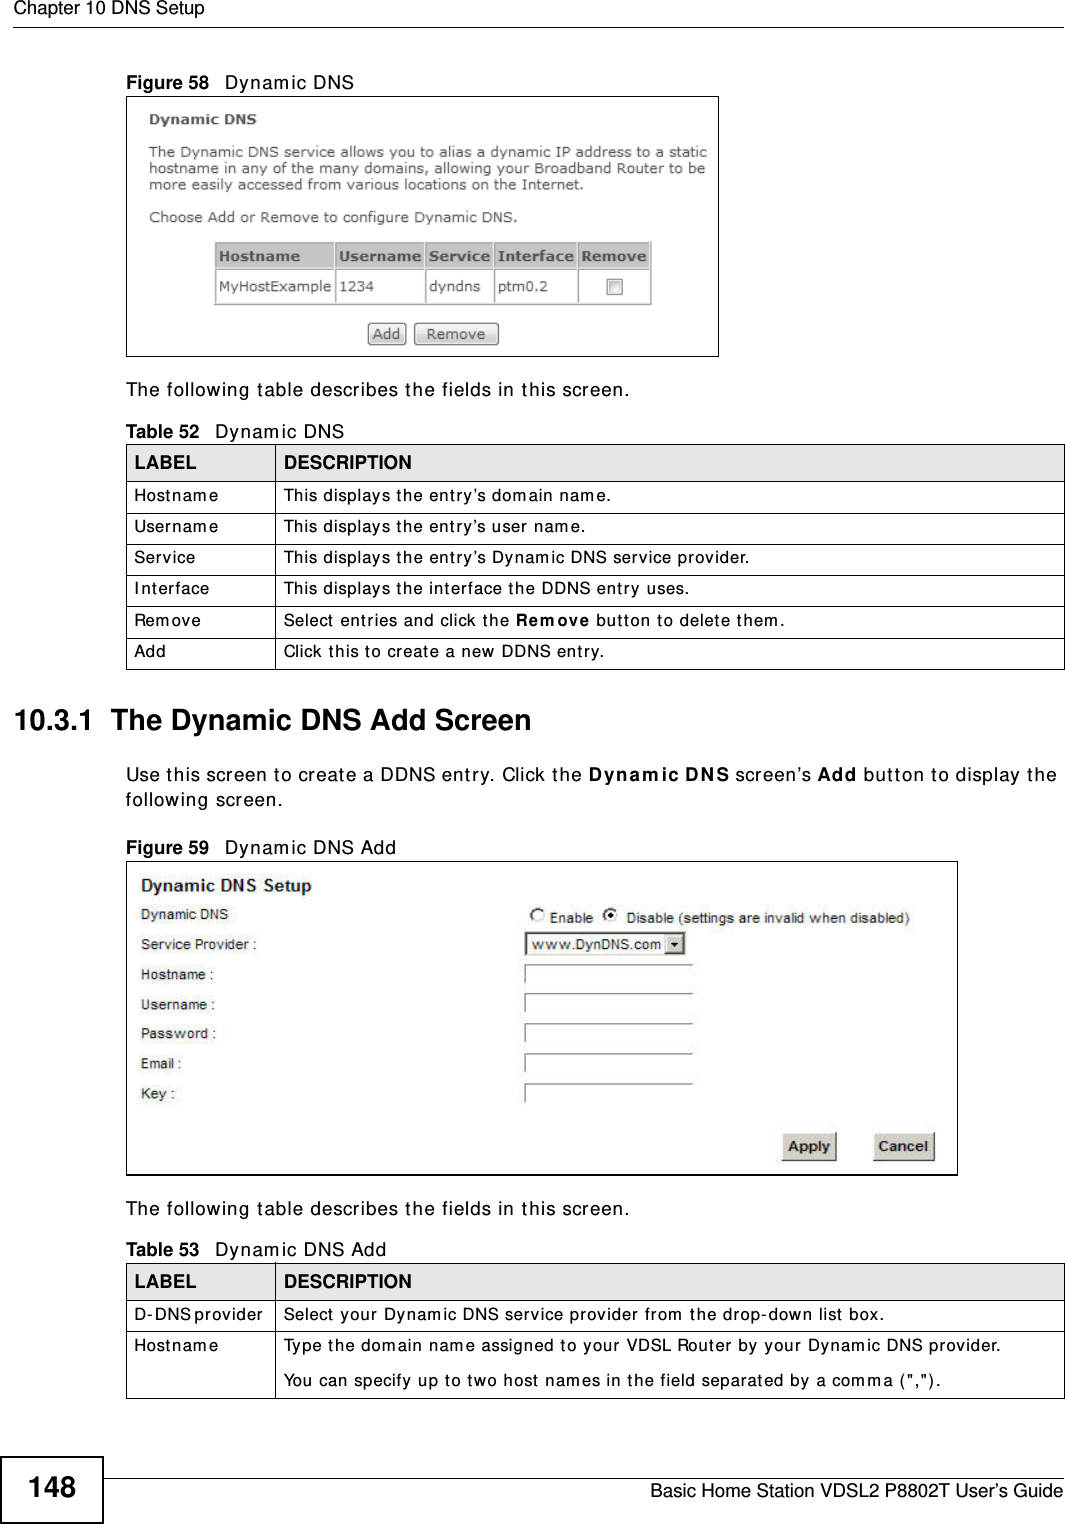 Chapter 10 DNS SetupBasic Home Station VDSL2 P8802T User’s Guide148Figure 58   Dynam ic DNSThe following t able describes t he fields in this screen. 10.3.1  The Dynamic DNS Add ScreenUse t his screen t o create a DDNS ent ry. Click t he D ynam ic DNS screen’s Add butt on t o display t he following screen.Figure 59   Dynam ic DNS AddThe following t able describes t he fields in this screen. Table 52   Dynamic DNSLABEL DESCRIPTIONHostnam e This displays the ent ry’s dom ain nam e.Usernam e This displays the entry’s user nam e.Service This displays the ent ry’s Dynam ic DNS service pr ovider.I nterface This displays t he int erface the DDNS ent ry uses.Rem ove Select entries and click the Re m ove  butt on to delet e t hem . Add Click this to creat e a new DDNS entr y.Table 53   Dynamic DNS AddLABEL DESCRIPTIOND- DNS pr ov id er   Select your Dynam ic DNS serv ice provider from  the dr op-down list  box.Hostnam e Type t he dom ain nam e assigned to your VDSL Rout er  by your Dynam ic DNS provider.You can specify up to two host nam es in the field separat ed by a com ma ( &quot;,&quot;) .